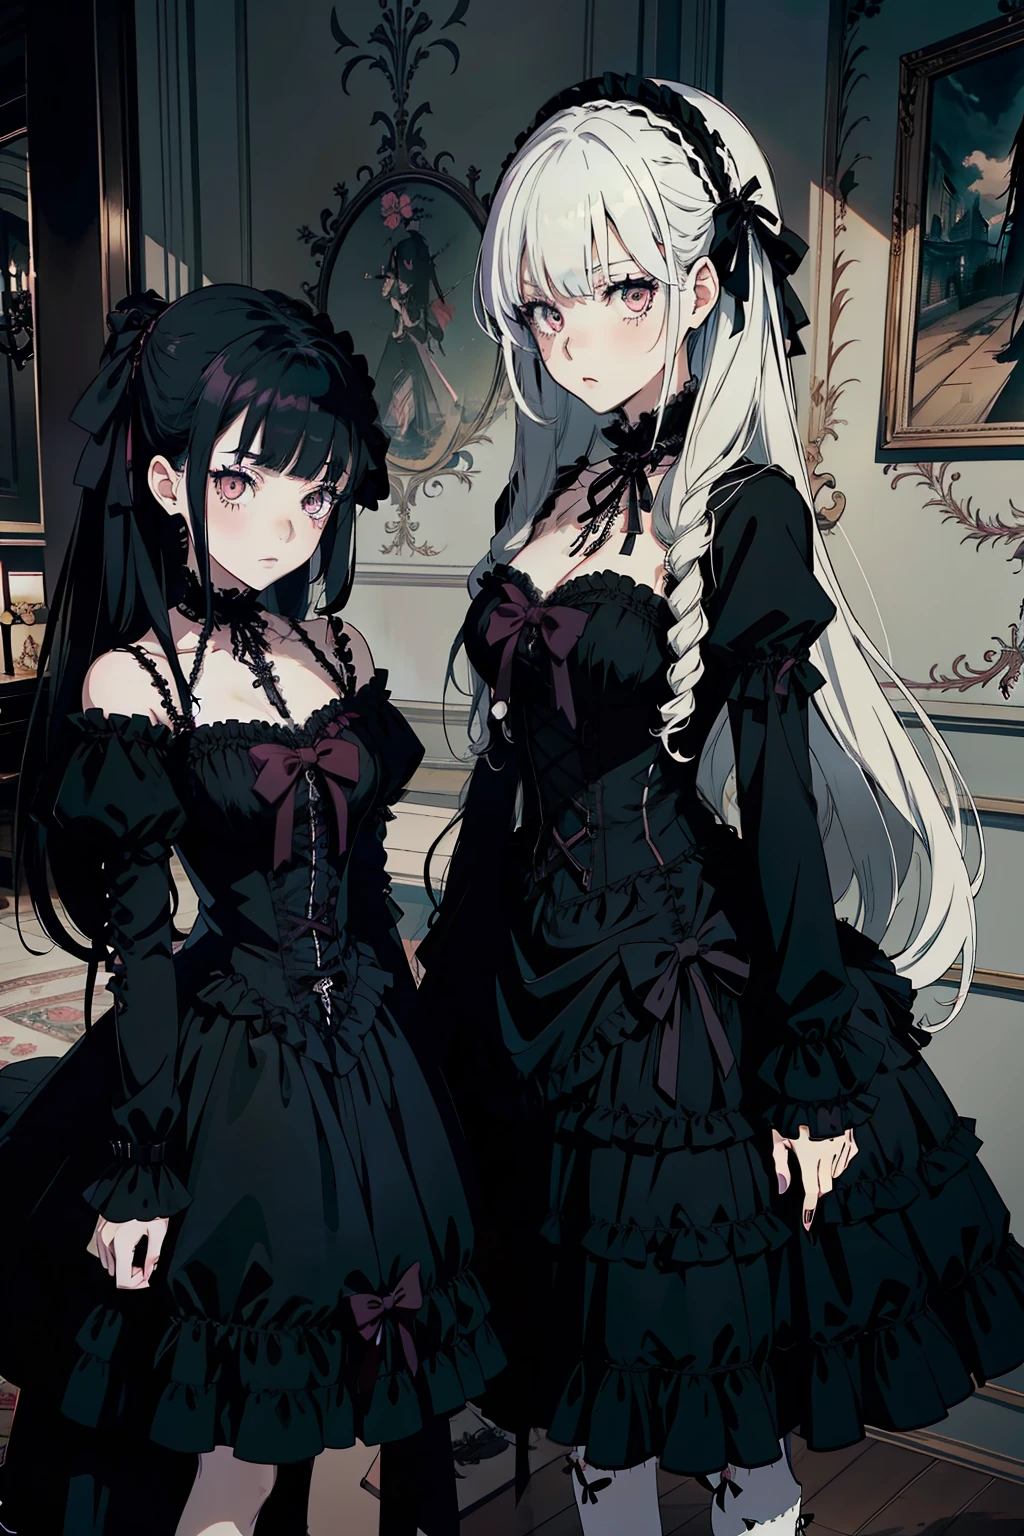 anime, goth girl, emo girl, long hair, lolita hair, gothic dress, black dress, victorian dress, white eyes, gothic art style, in a mansion, two maids behind,